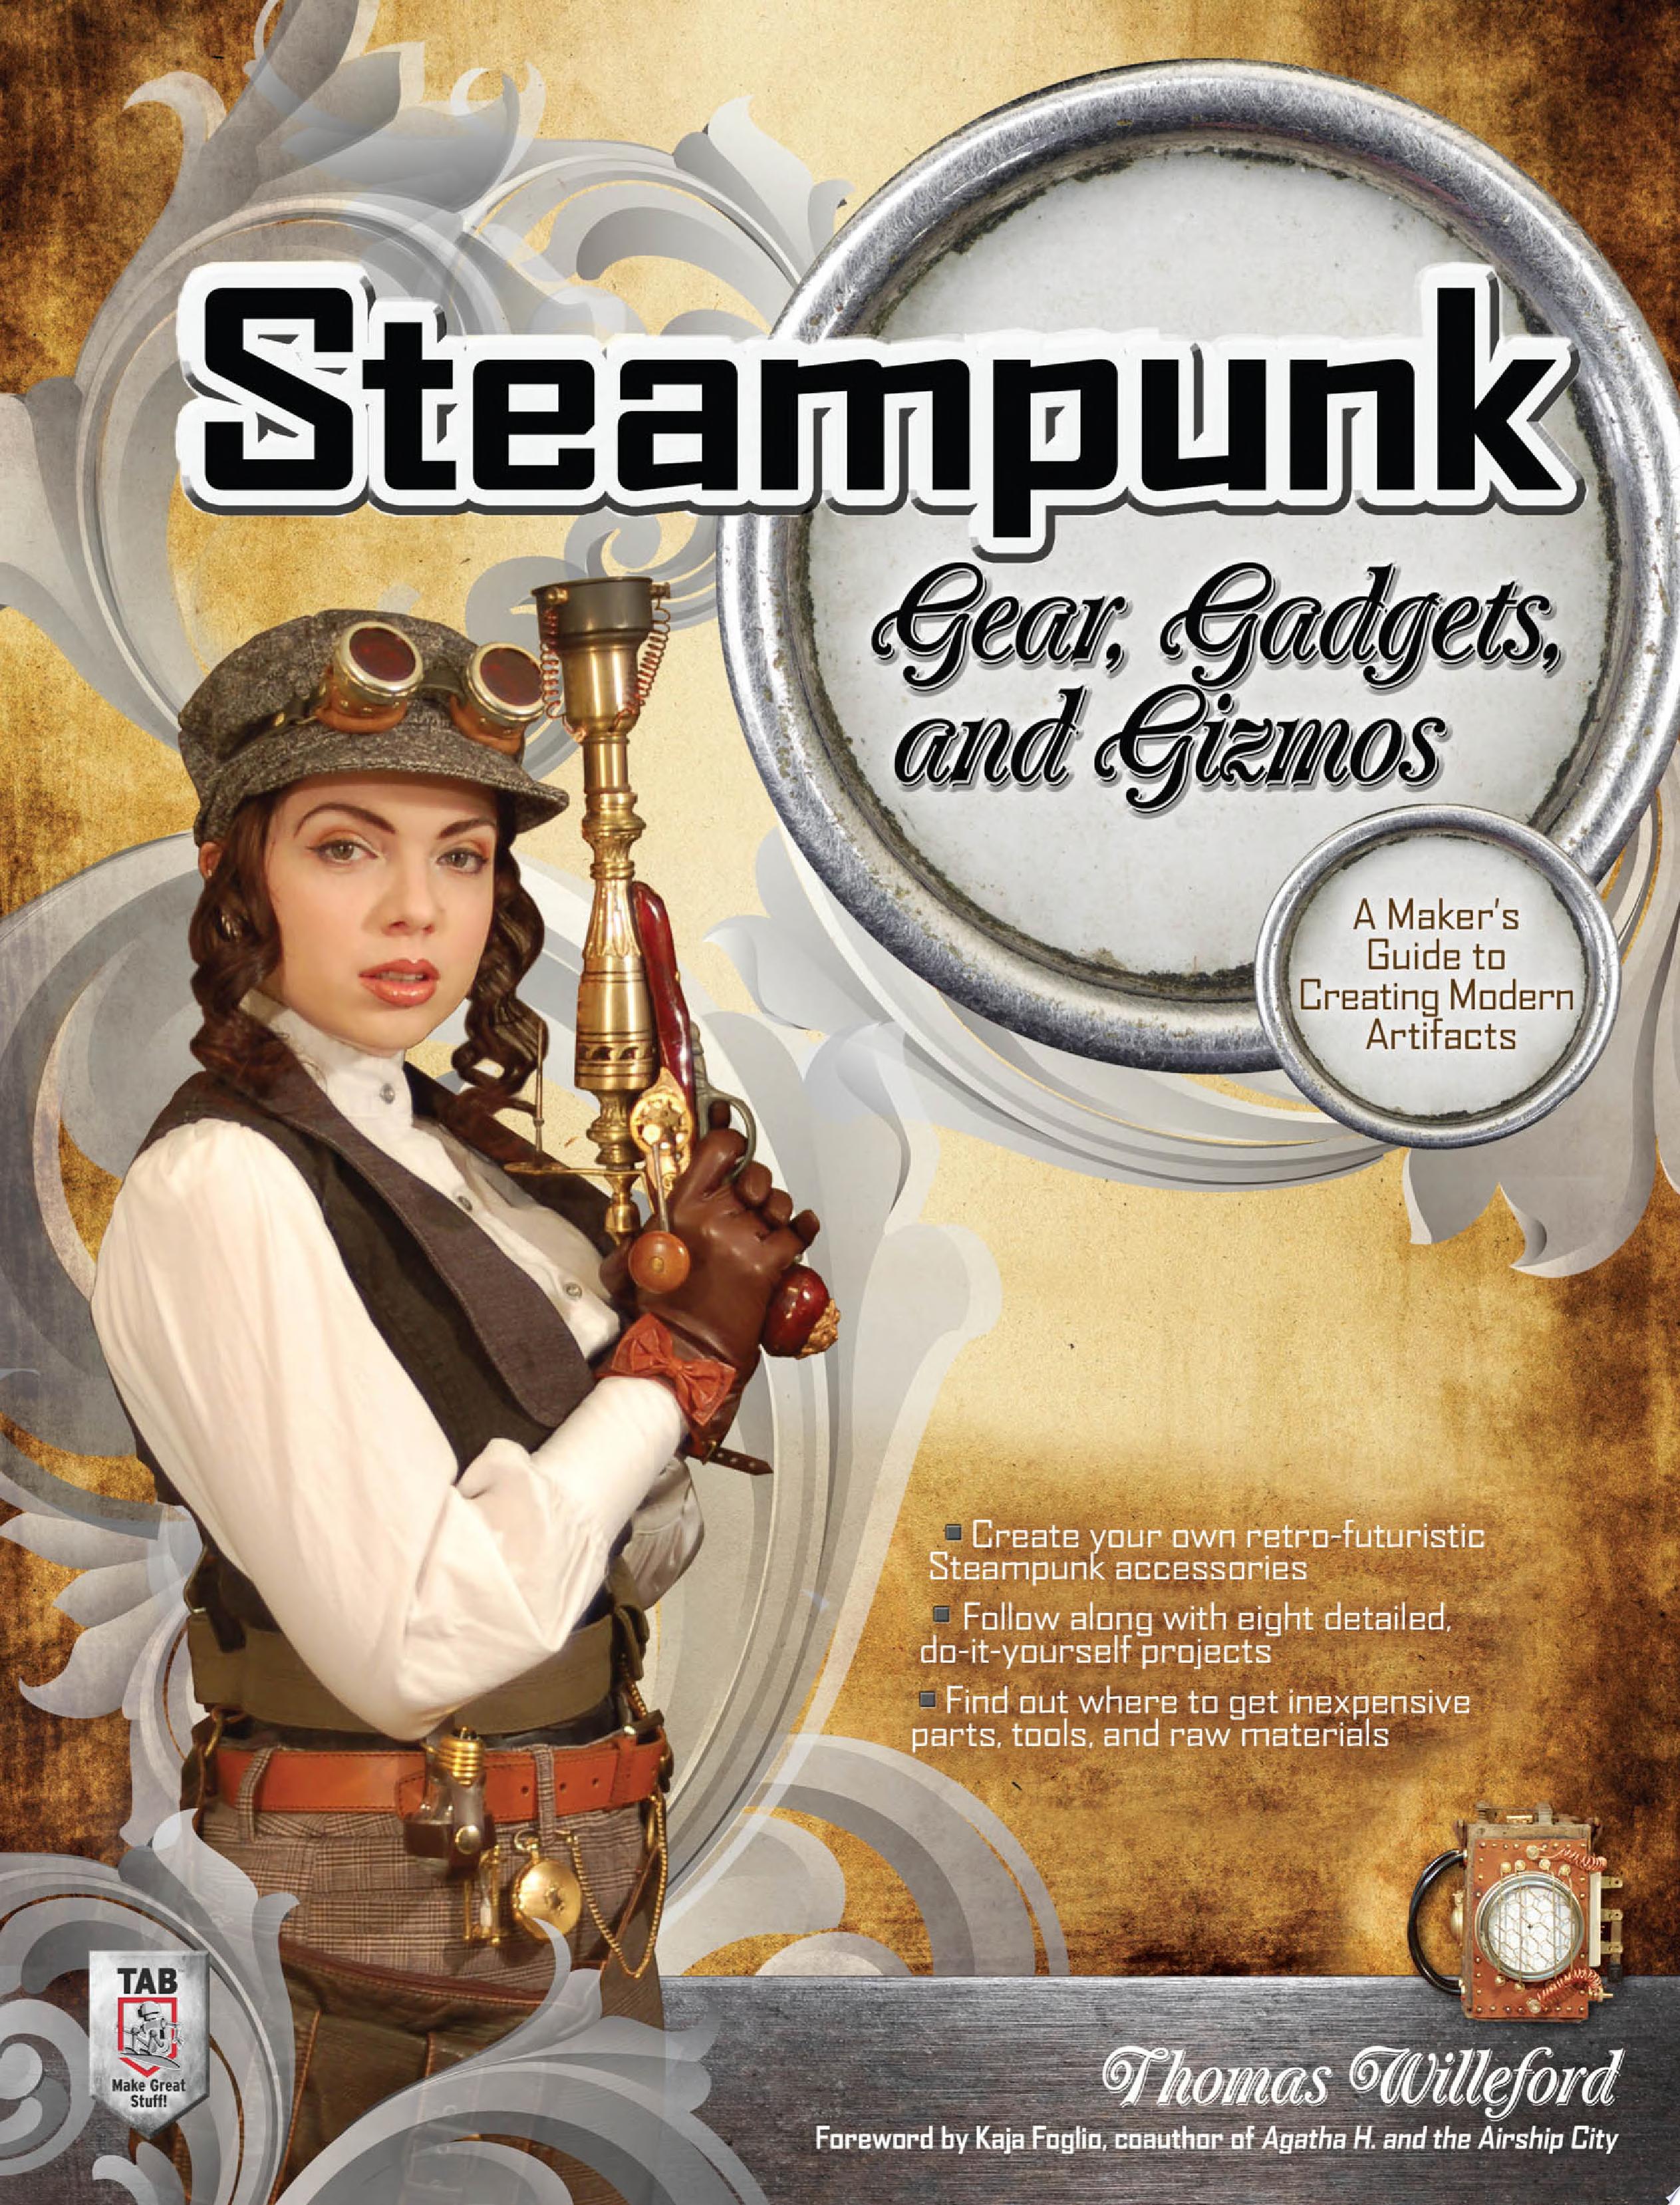 Image for "Steampunk Gear, Gadgets, and Gizmos: A Maker's Guide to Creating Modern Artifacts"